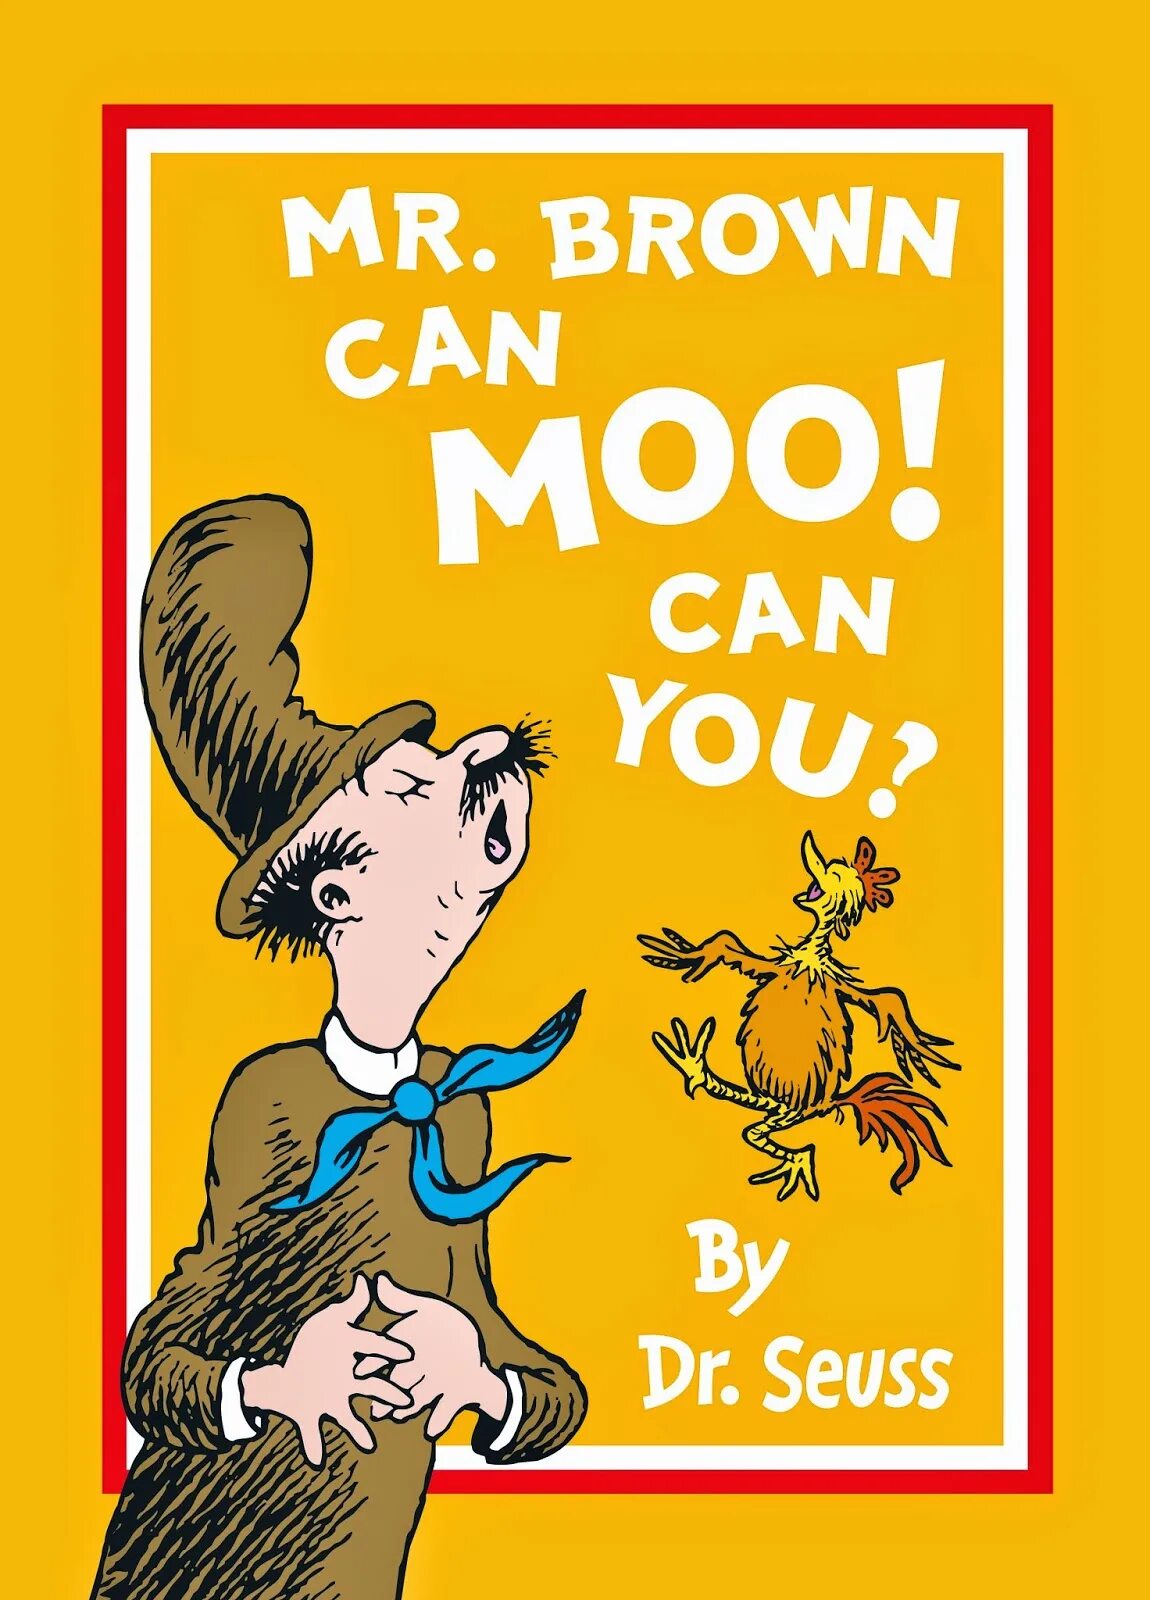 I can brown. Mr. Brown can Moo! Can you?. Mr Brown Moo Moo. Mr Brown can Moo текст. Mr.Brown Аино.